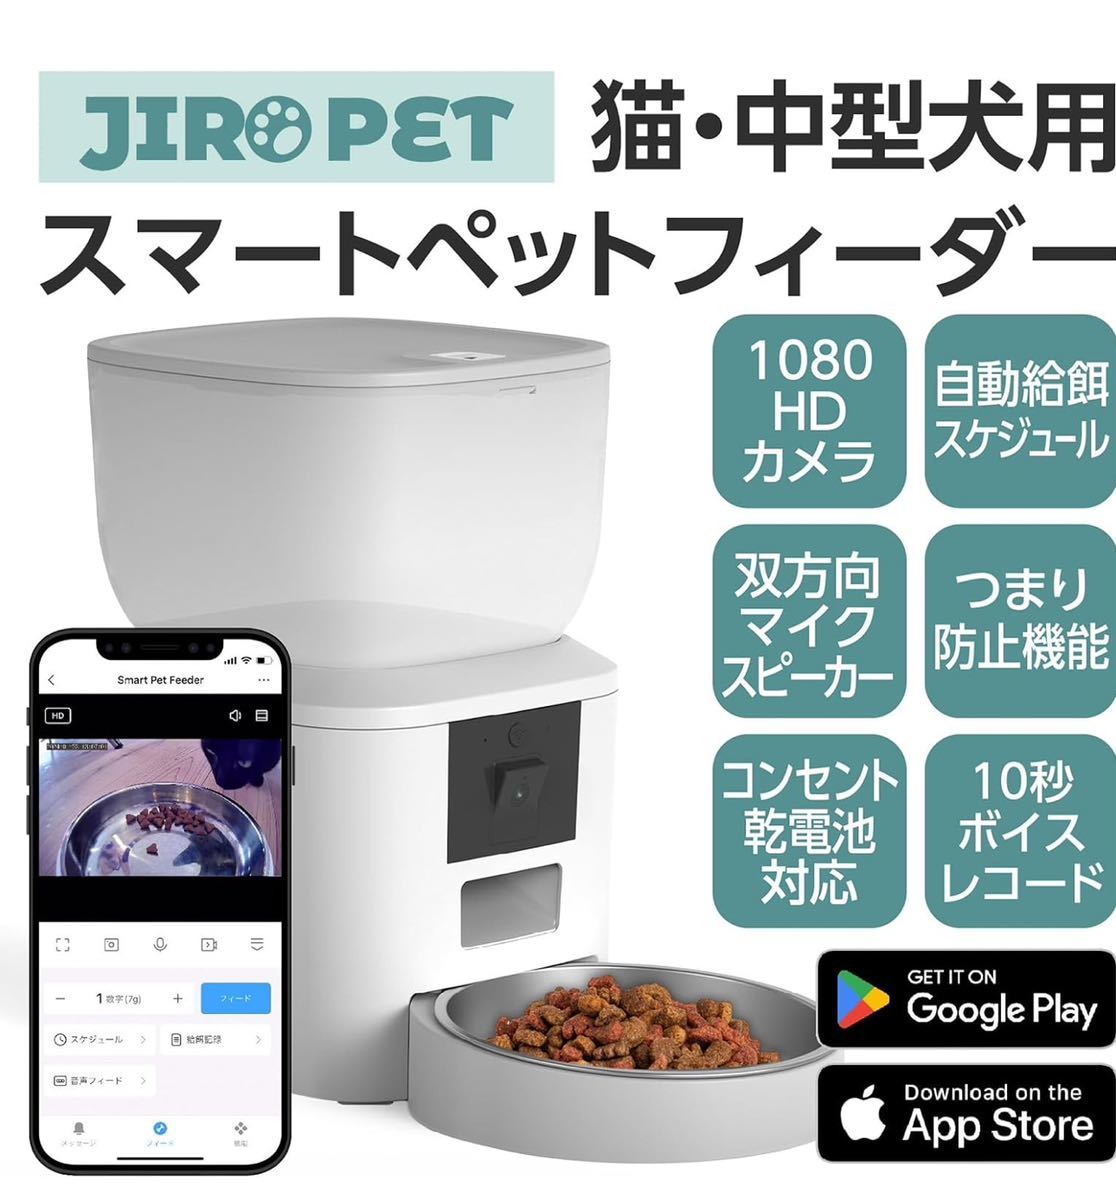 JIROPET automatic feeder 1080P camera attaching cat middle small size dog smartphone .. operation Wifi5G correspondence camera switch night vision function iOS Android correspondence Japanese instructions attaching 